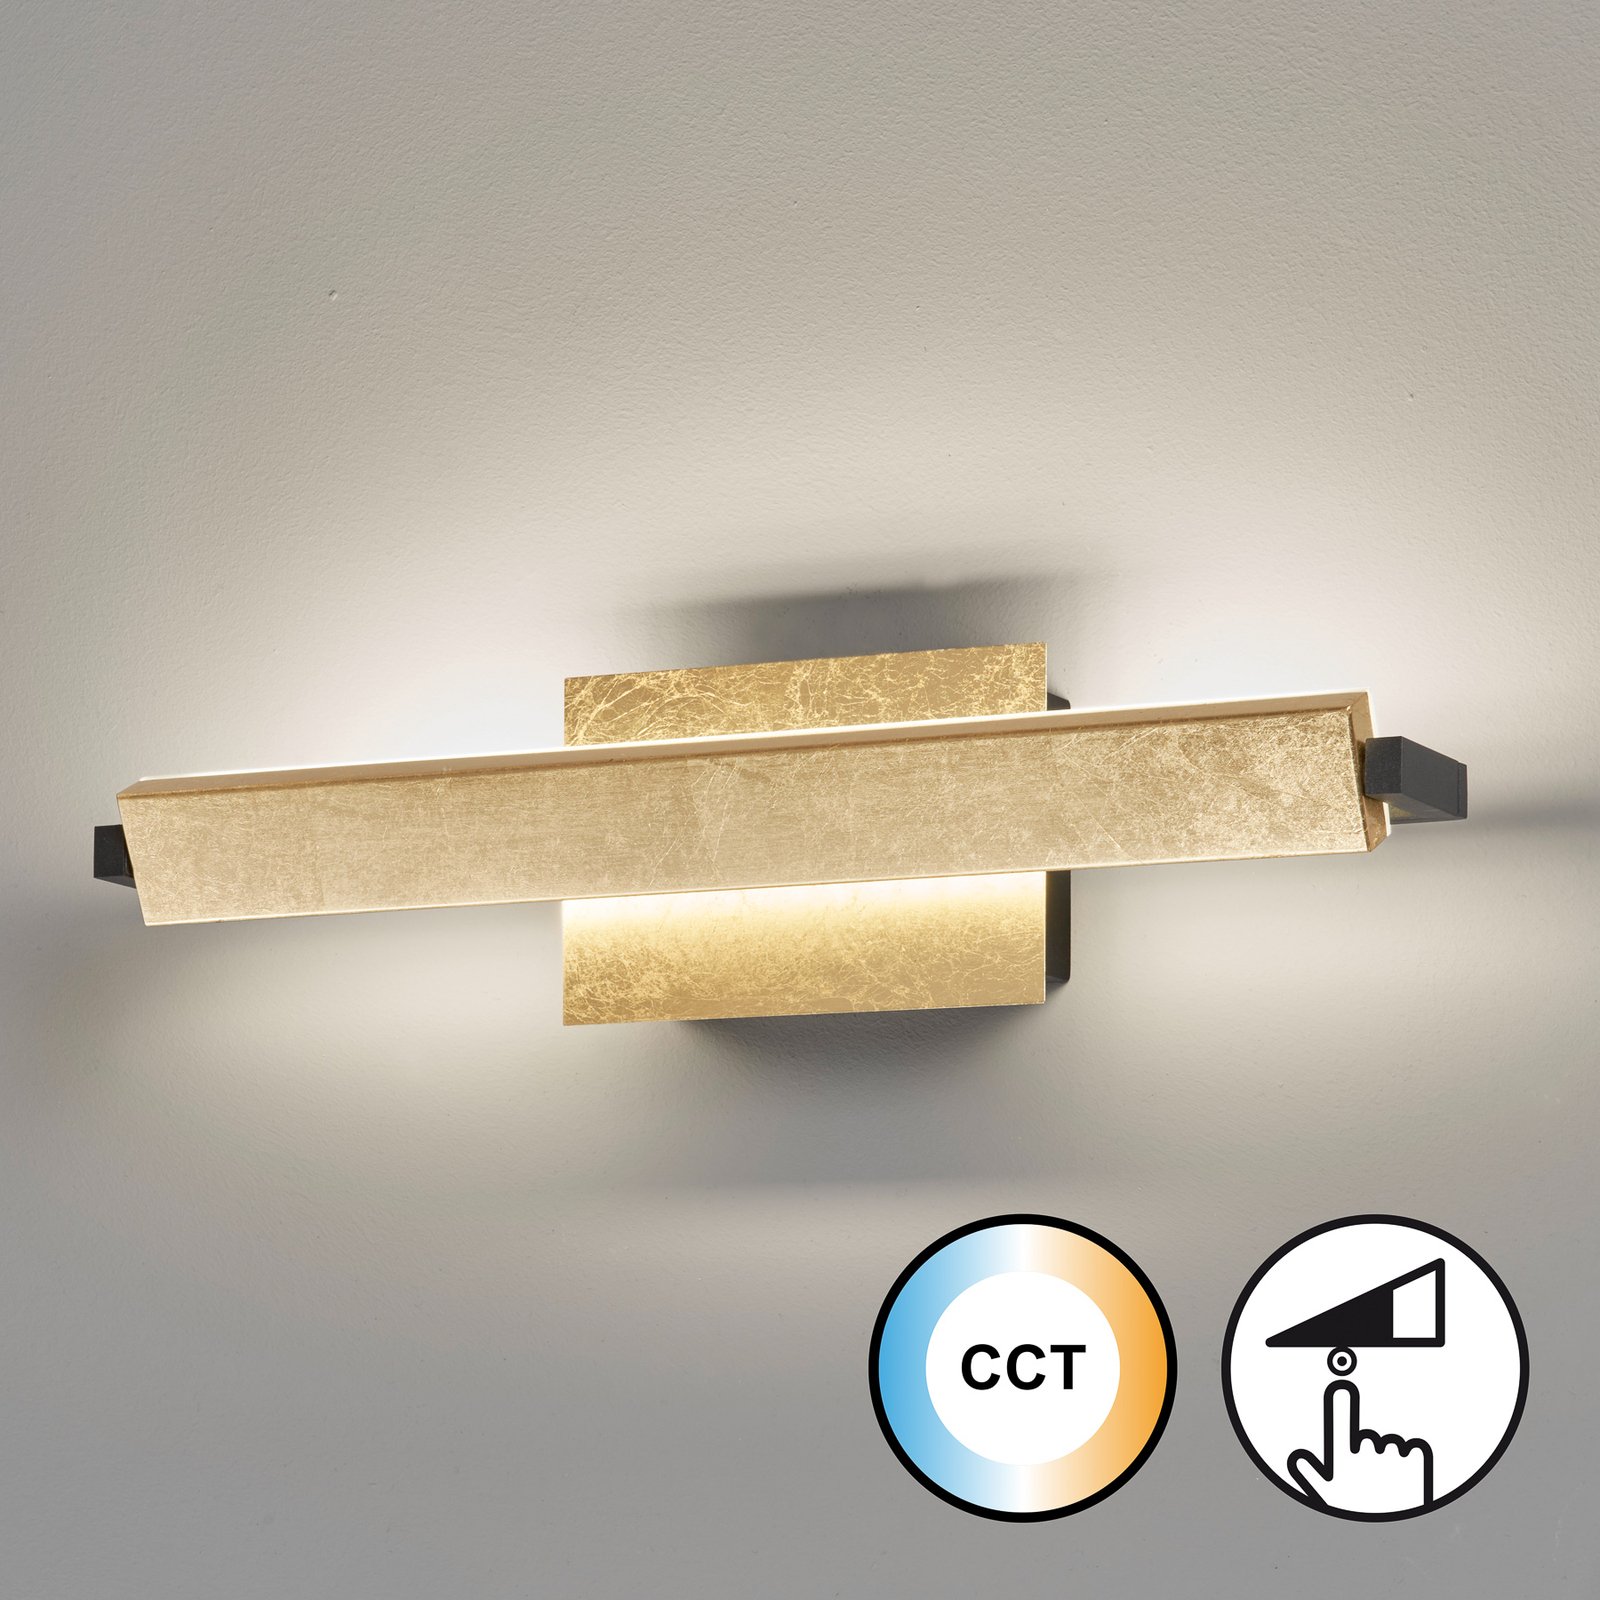 LED wall light Pare, gold-coloured, width 40 cm, metal, CCT